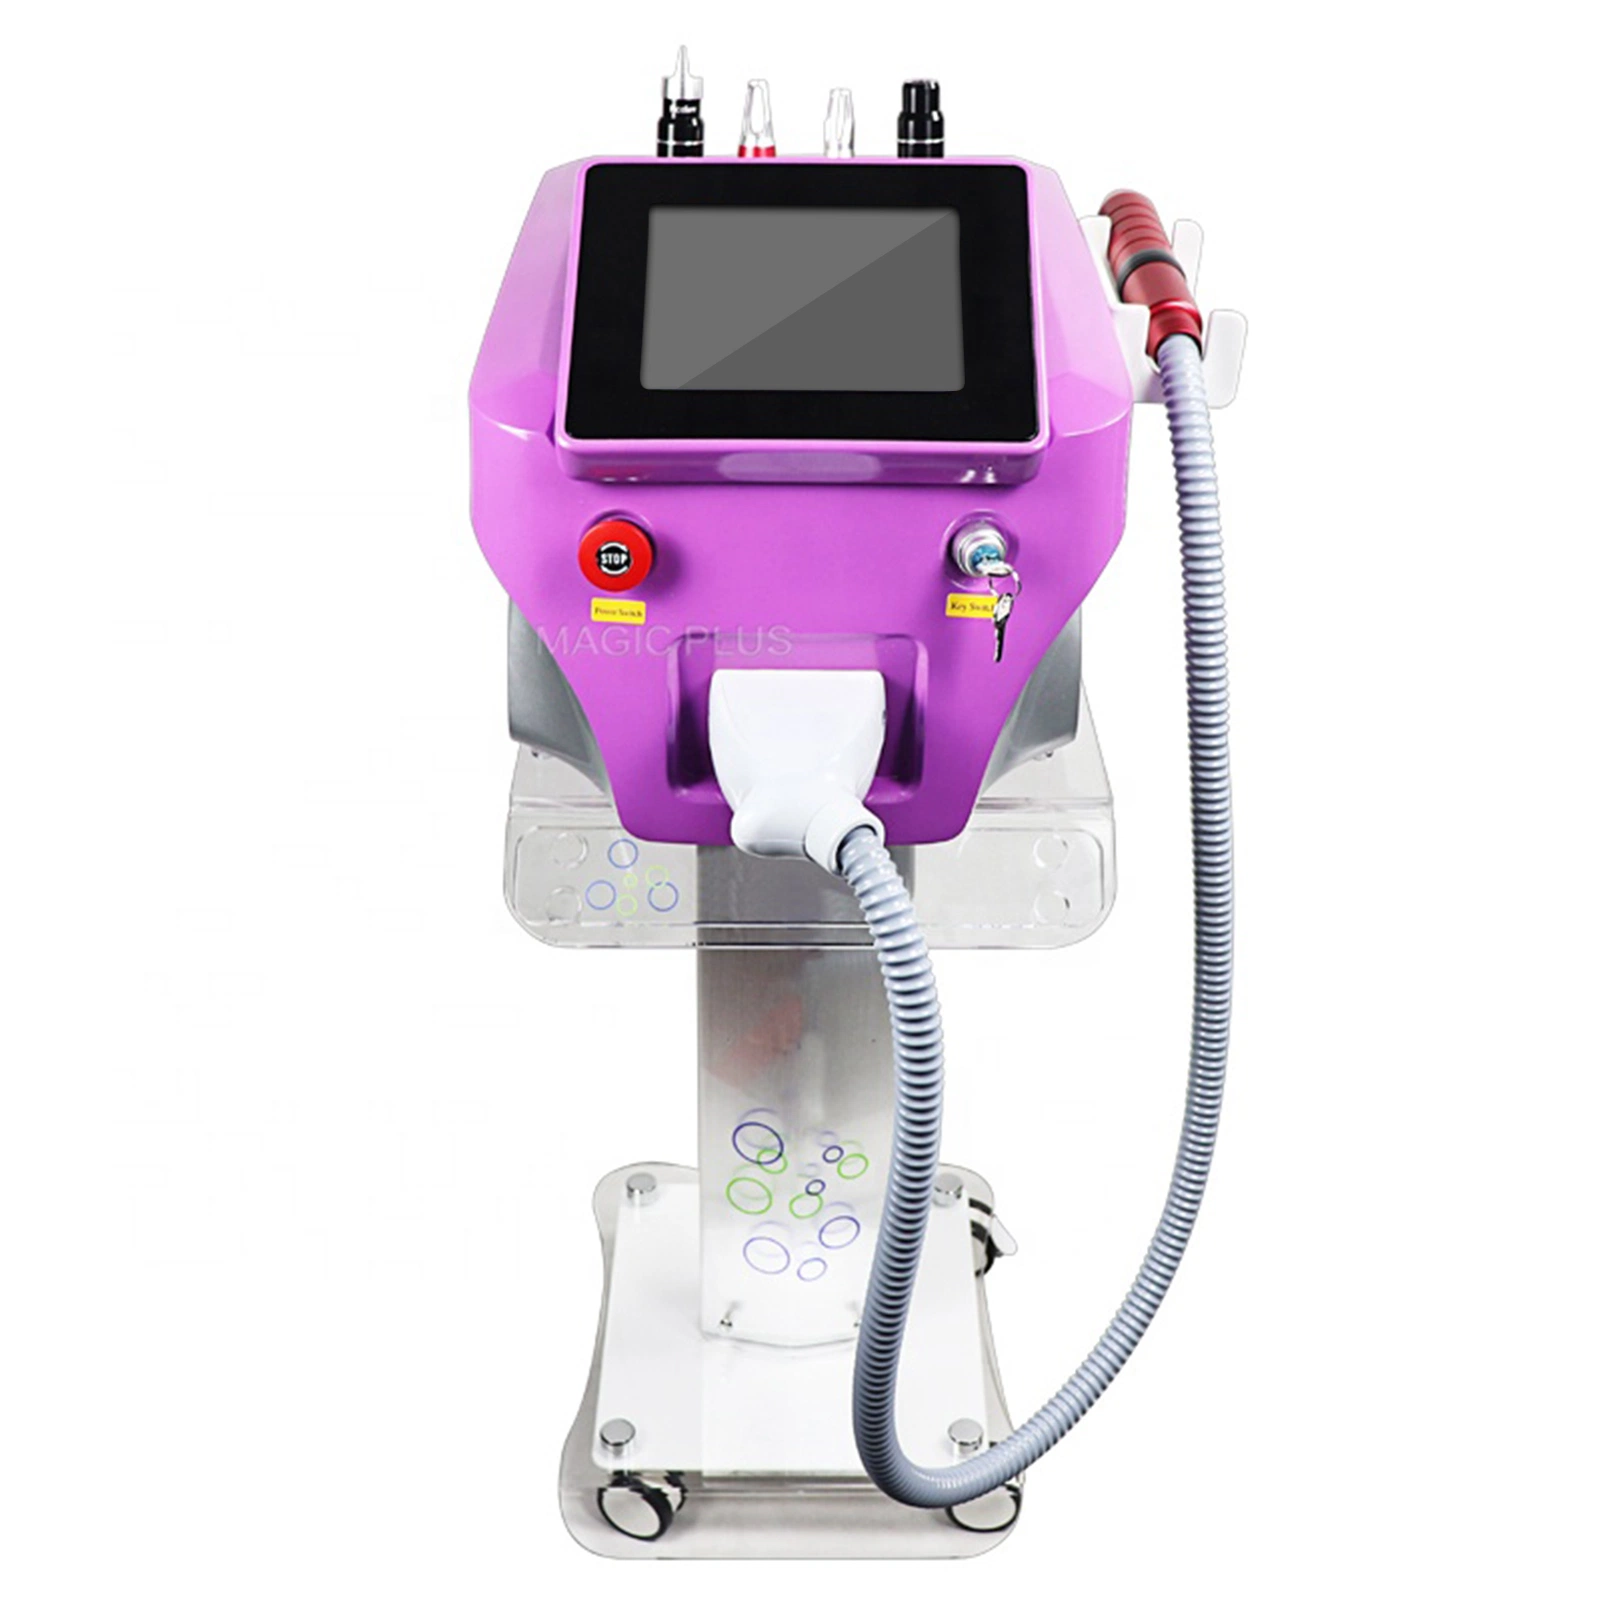 New Portable Picosecond/Laser Painless Tattoo Removal Skin Rejuvenation Beauty Equipment for Sale